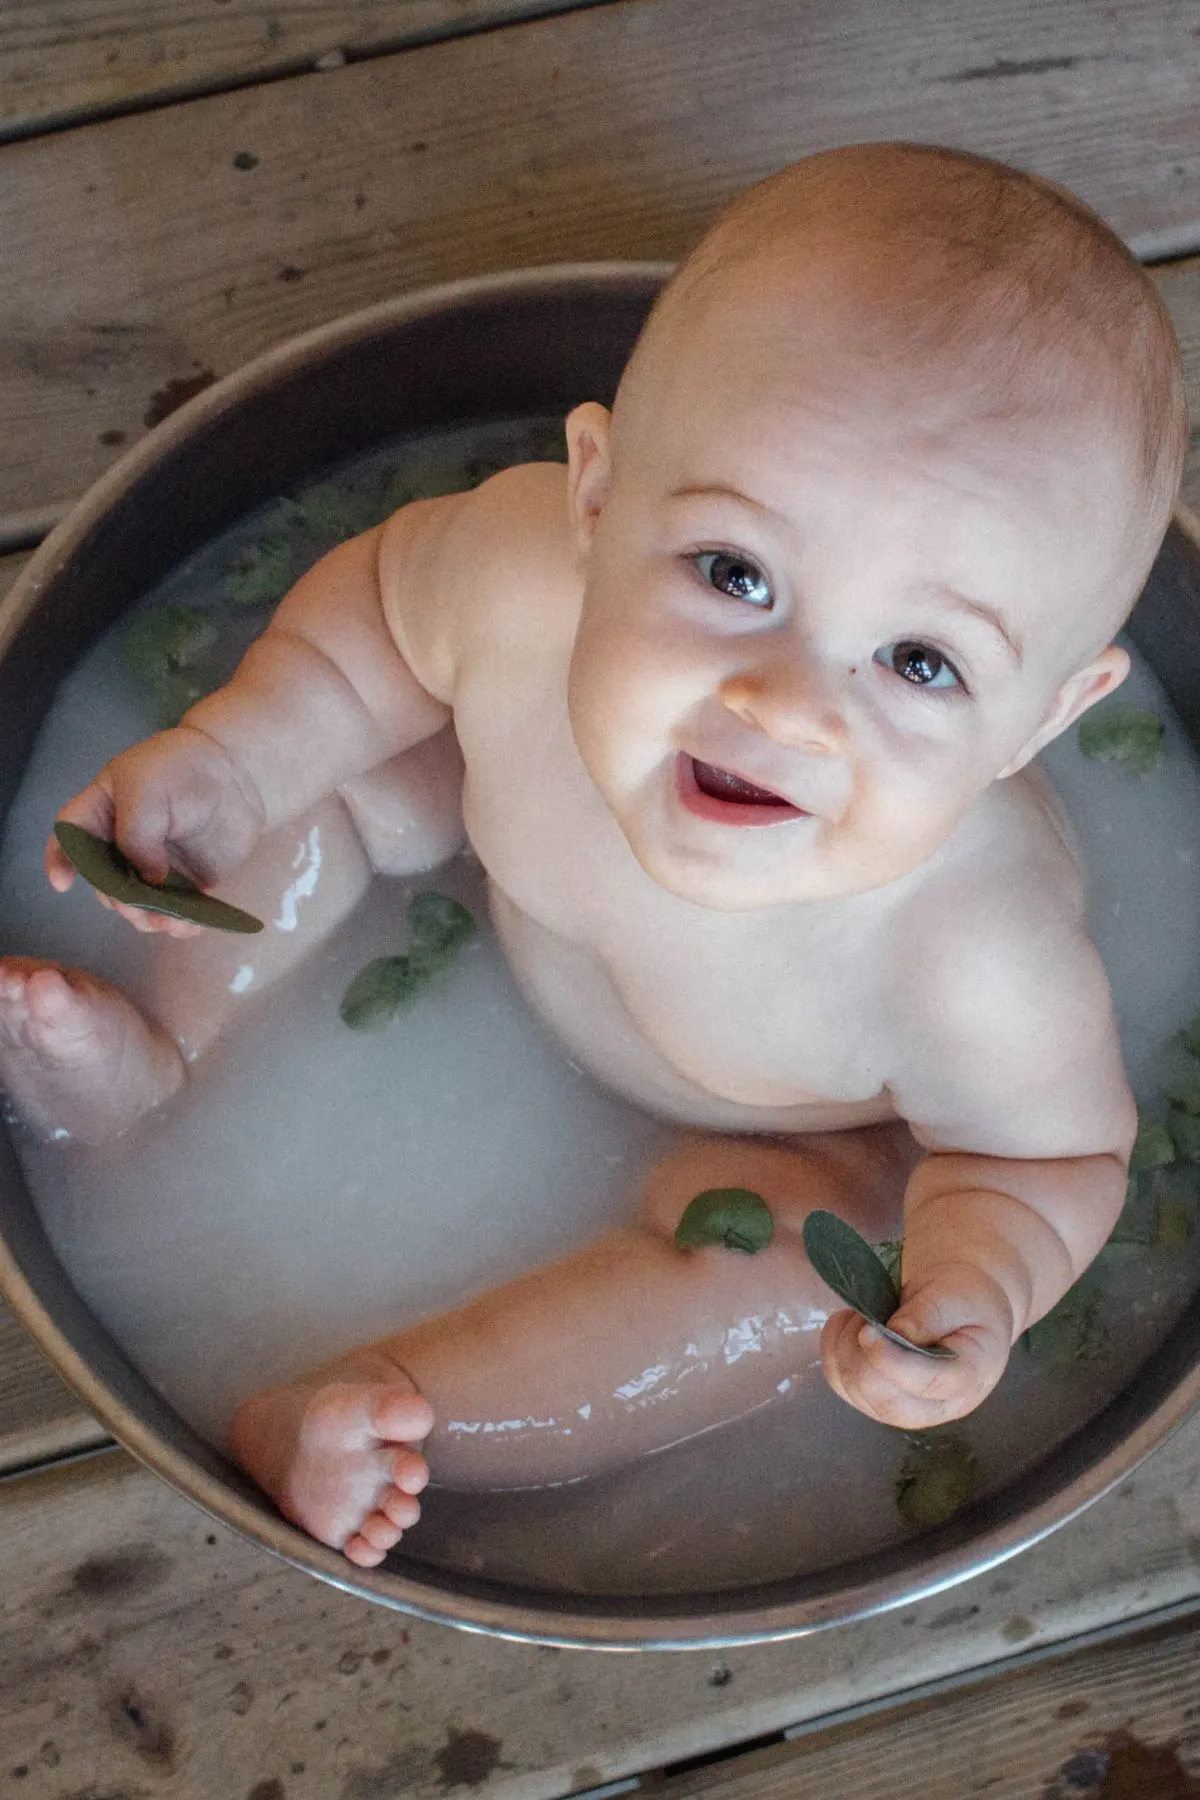 A smiling baby in a small round tub filled with breast milk bath water.